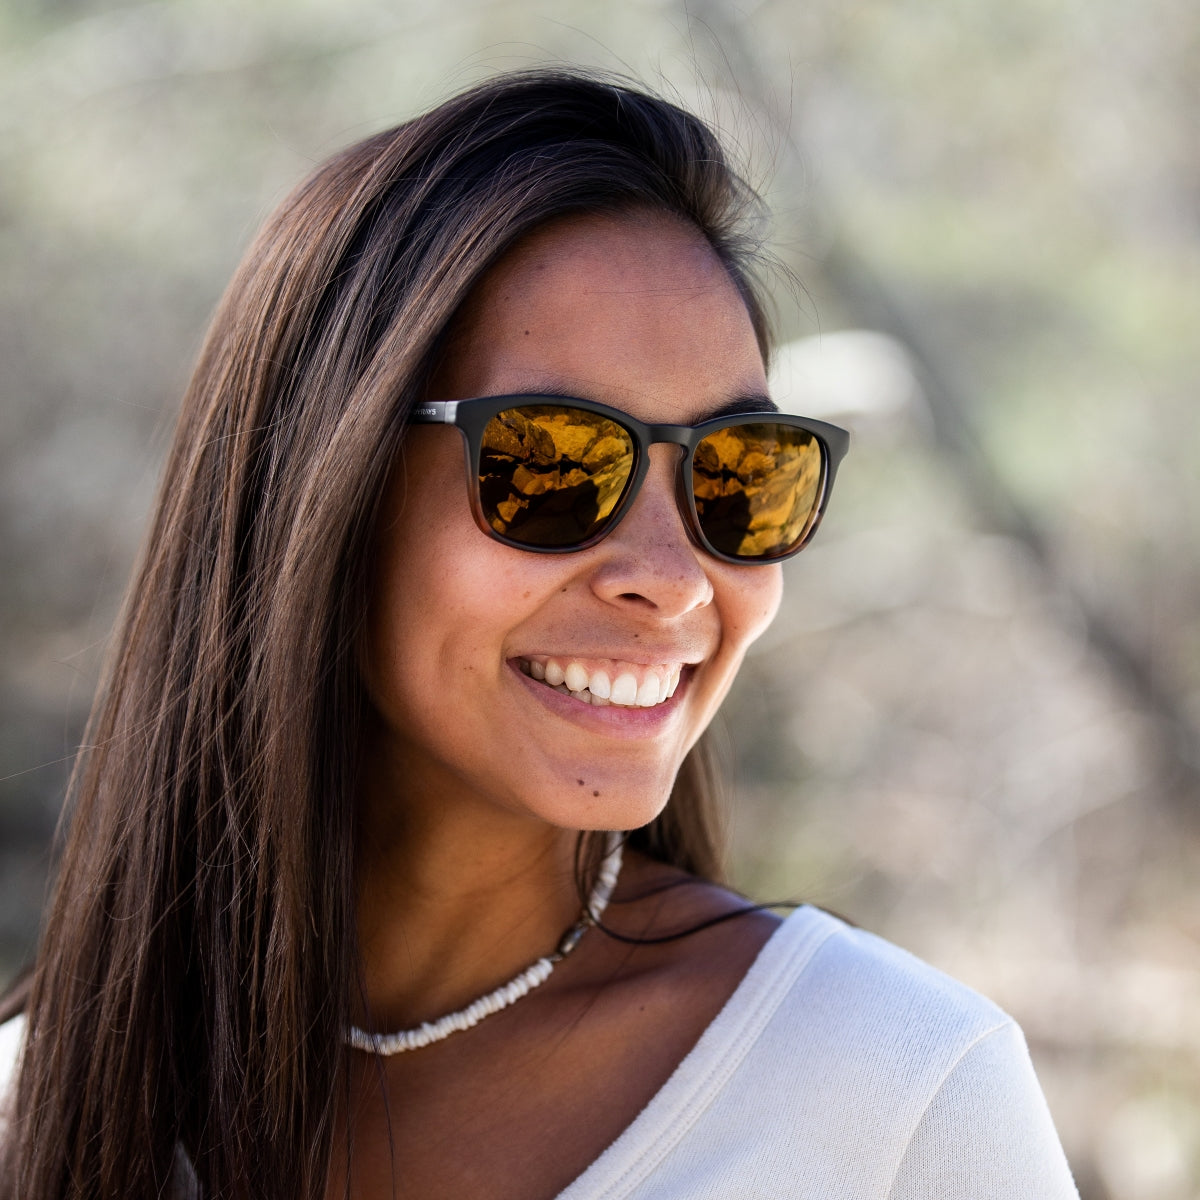 Cypress - Black Tortoise Polarized Sunglasses | Tortoise Sunglasses | Best Christmas Gifts | Gifts for The Holidays | Unique Gifts for Friends| Shady